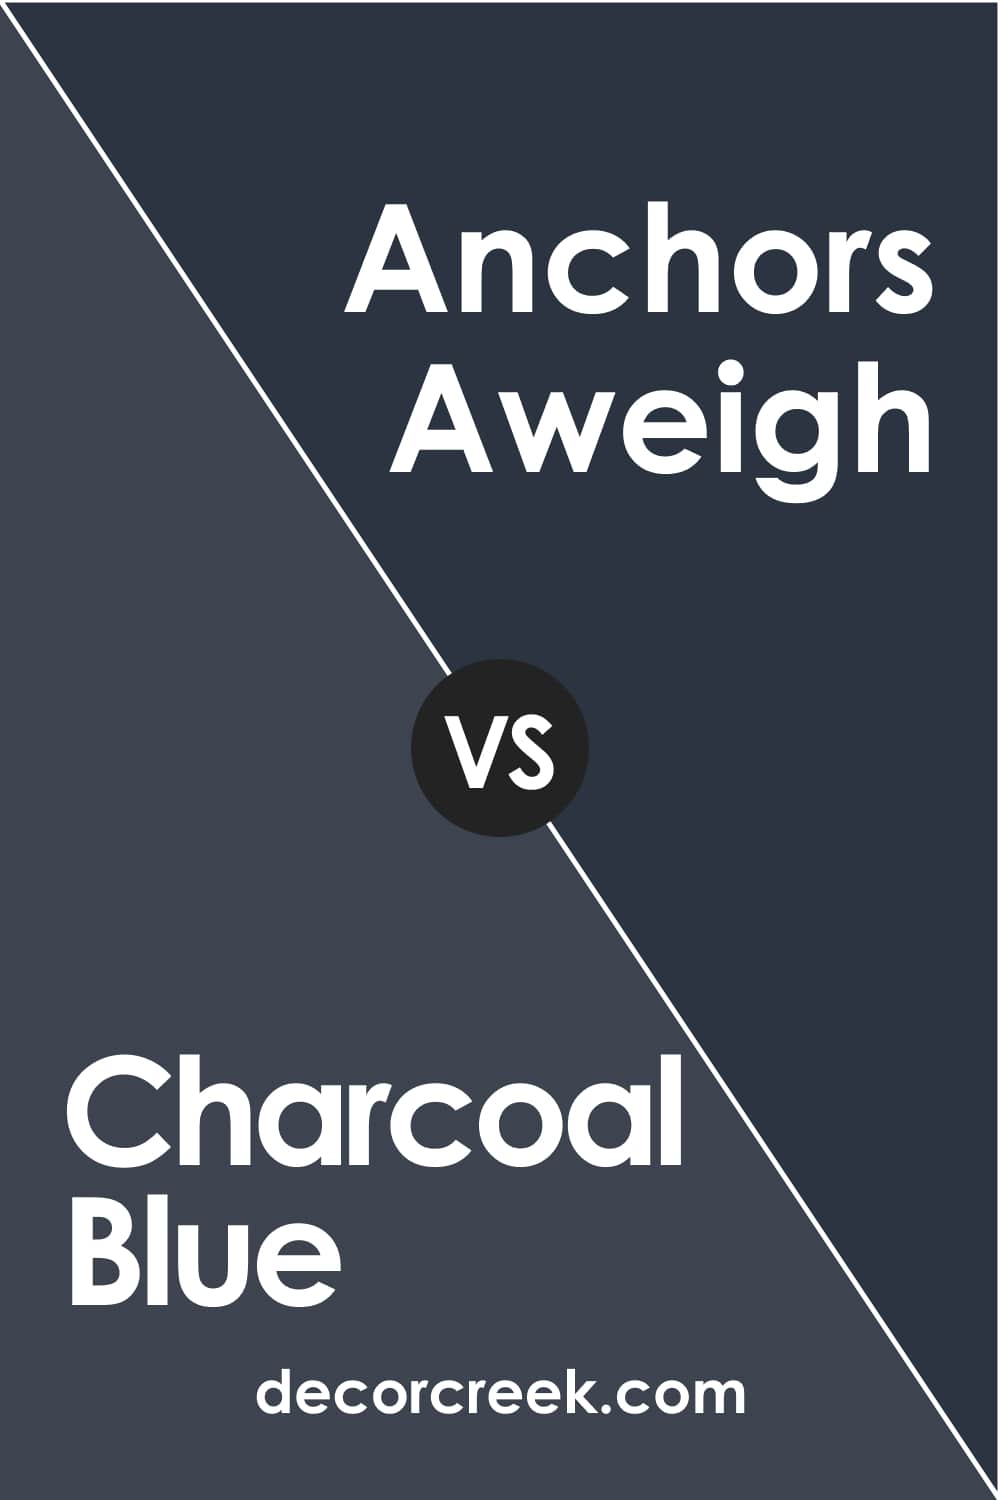 Charcoal Blue vs Anchors Aweigh